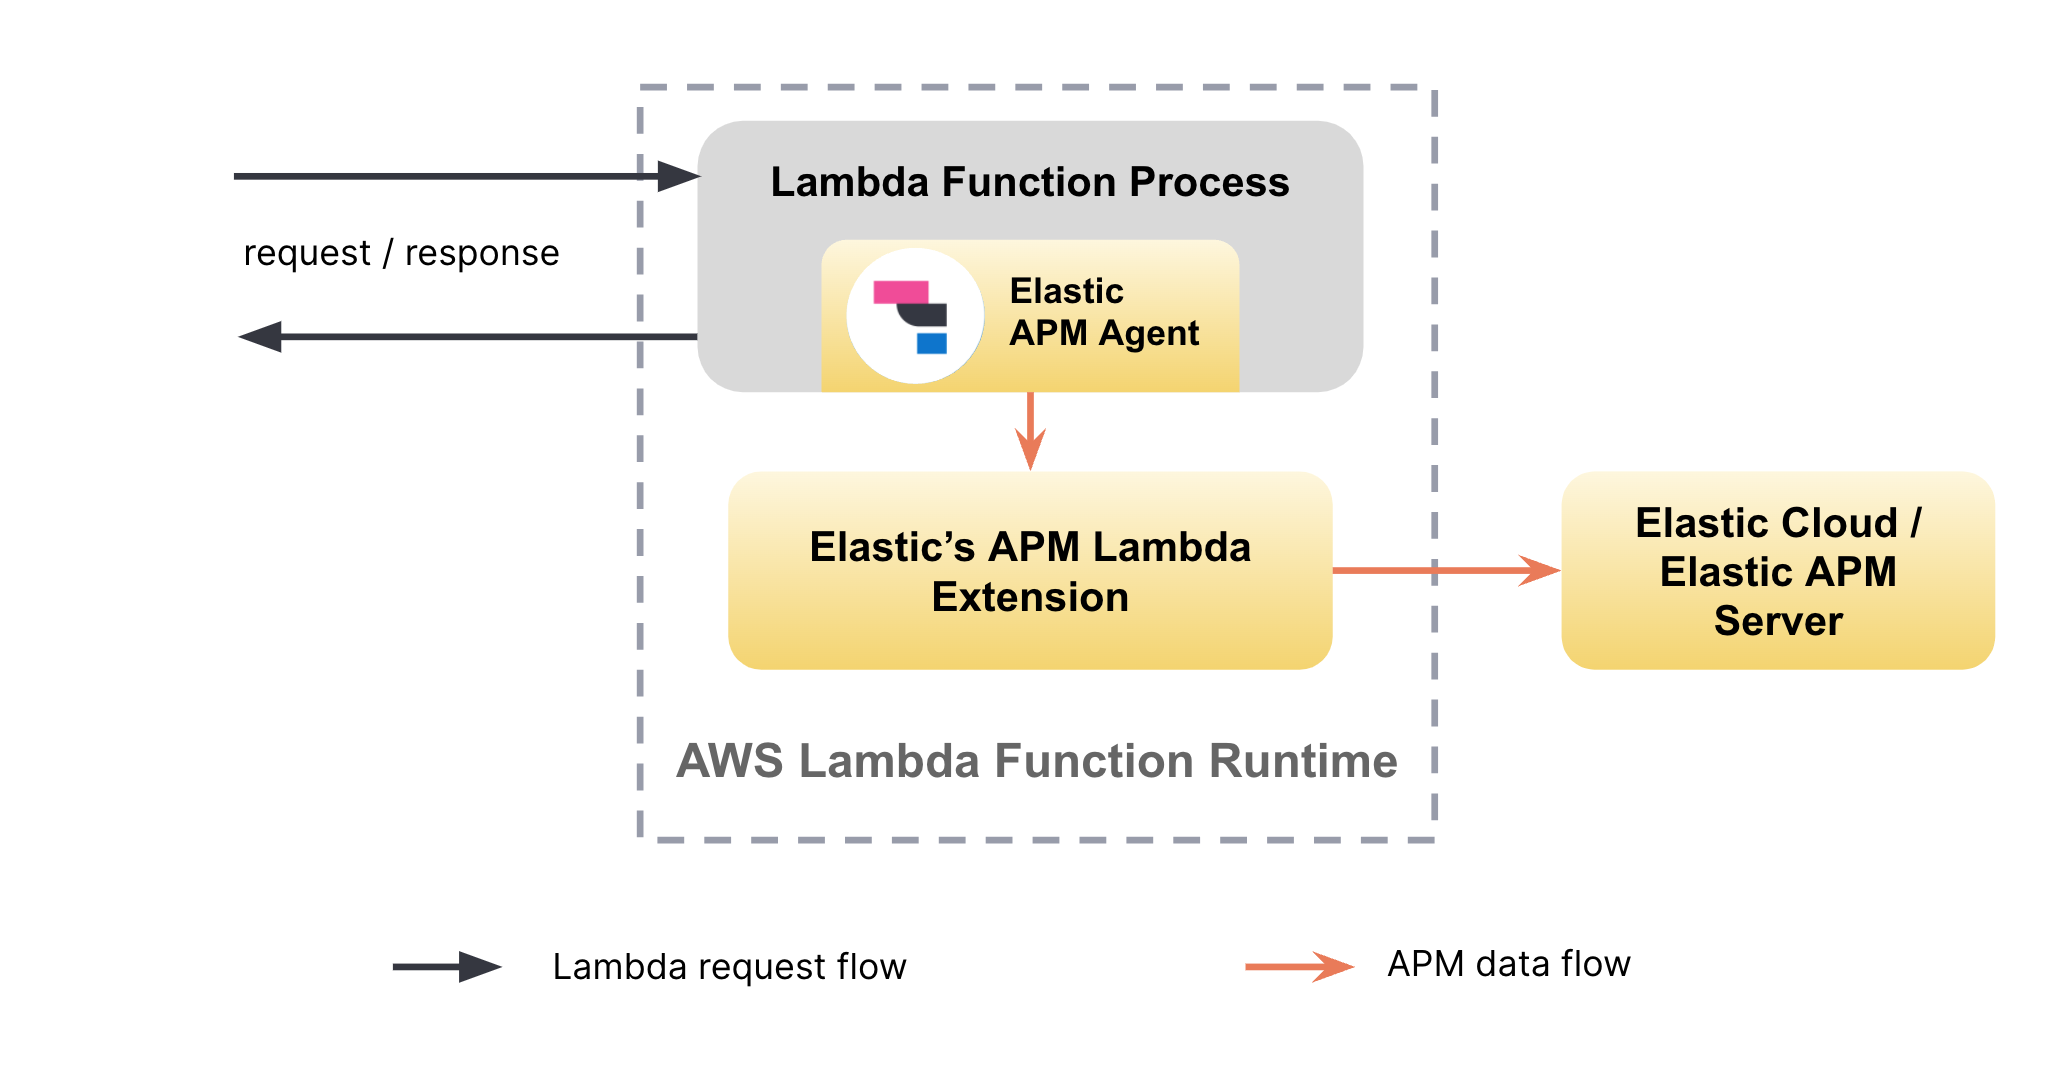 image showing data flow from lambda function